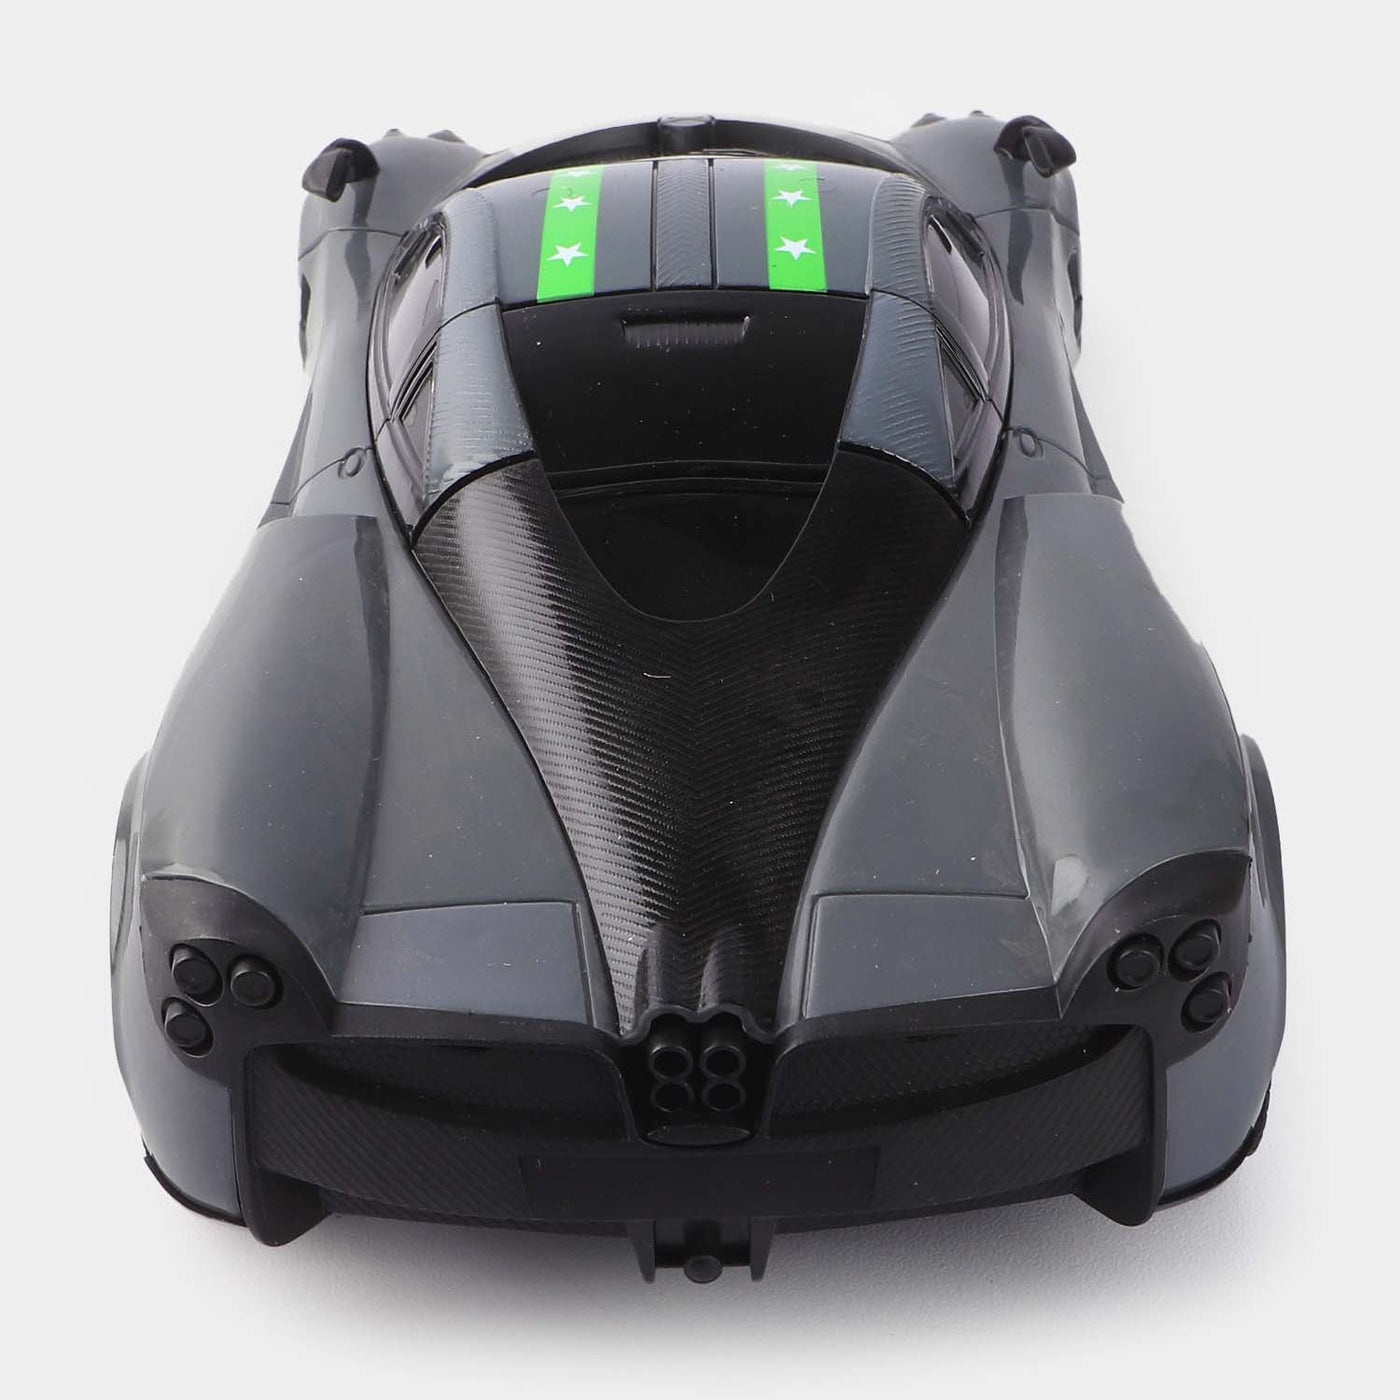 Remote Control Superior Sports Car For Kids